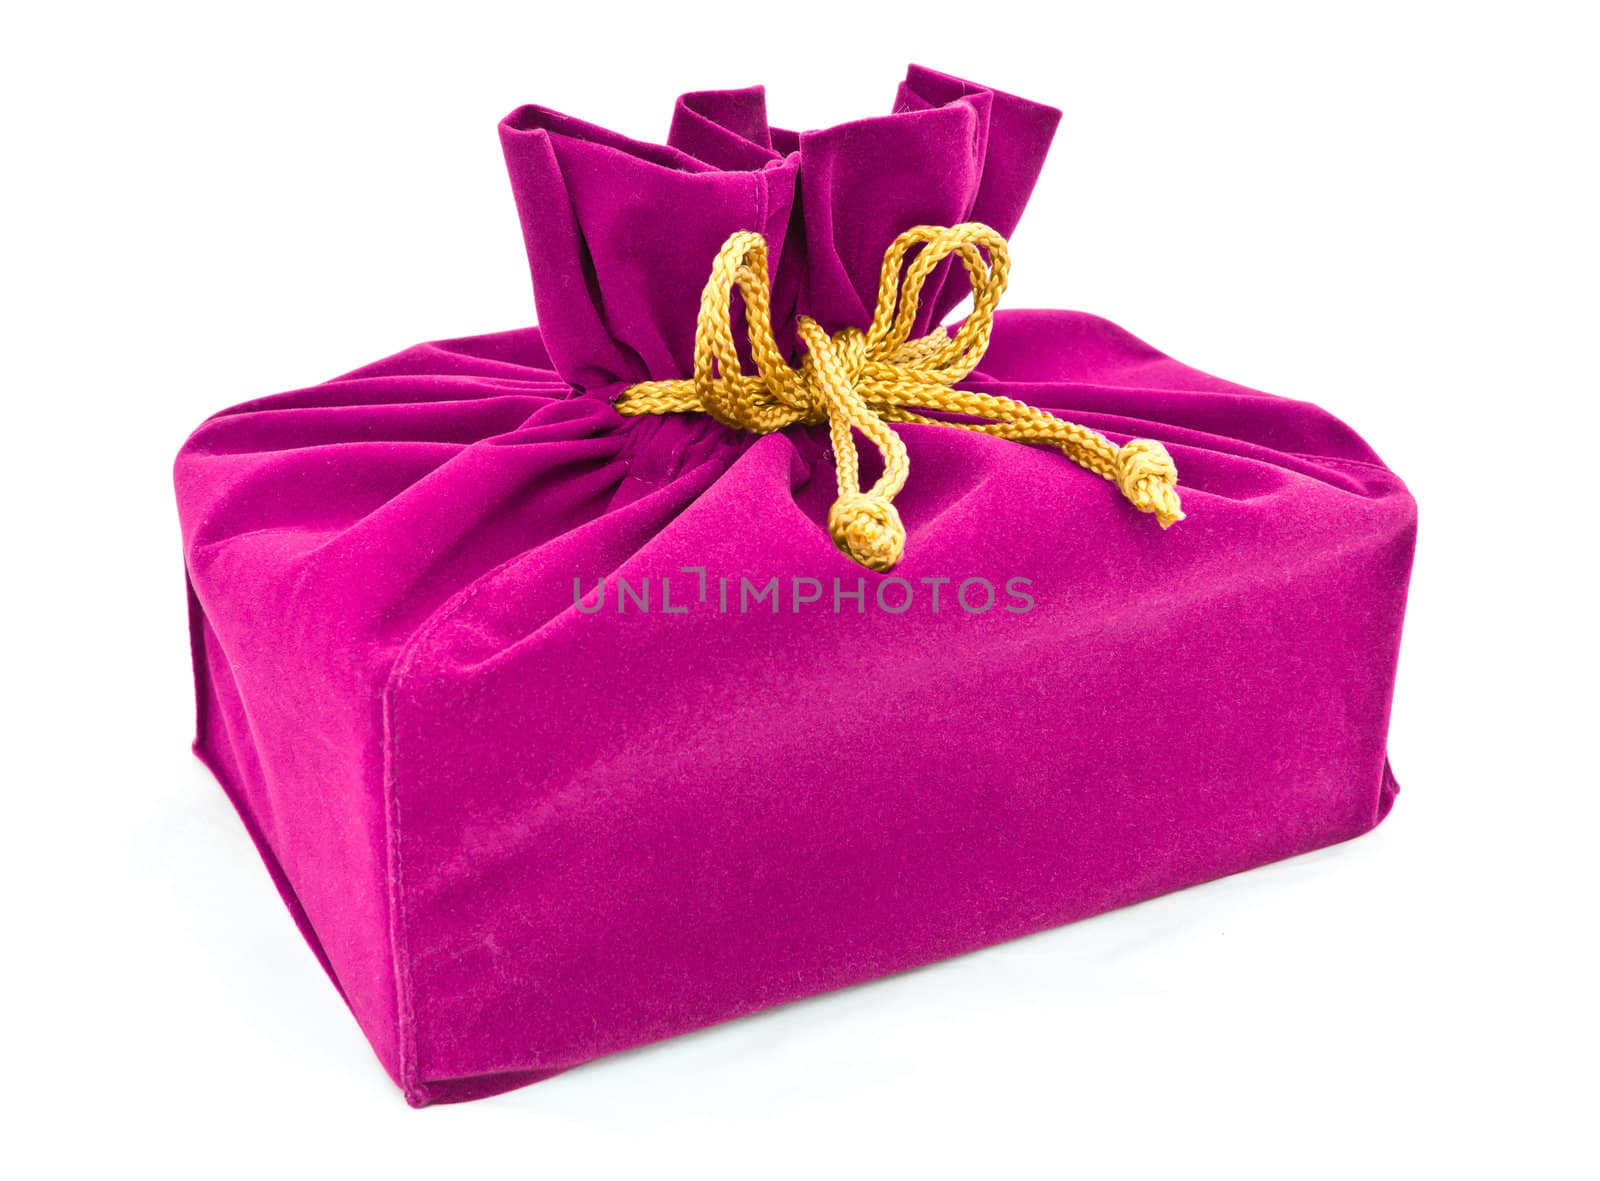 pink fabric gift bag isolated